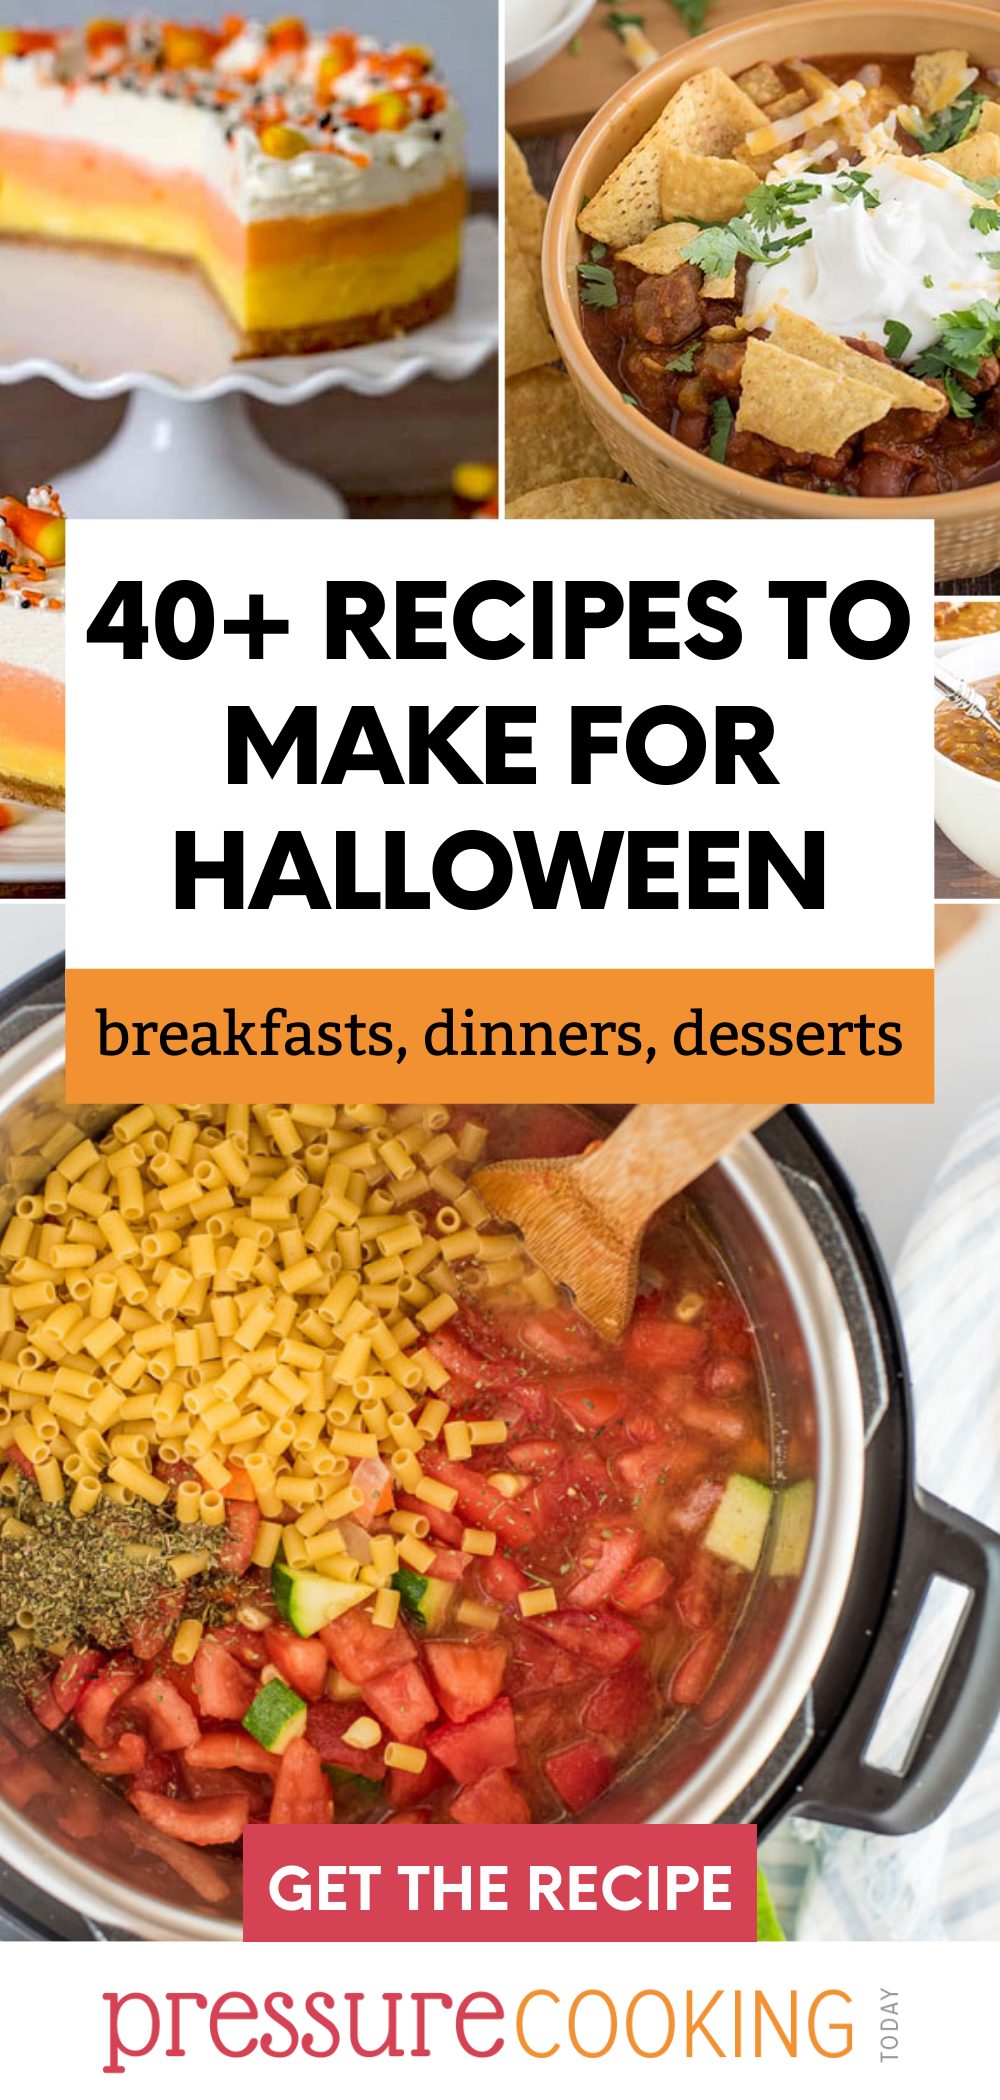 Instant Pot breakfasts + dinners that feature fall flavors and will keep you warm throughout October, plus AMAZING DESSERTS to celebrate Halloween with (and use up your extra candy)! via @PressureCook2da